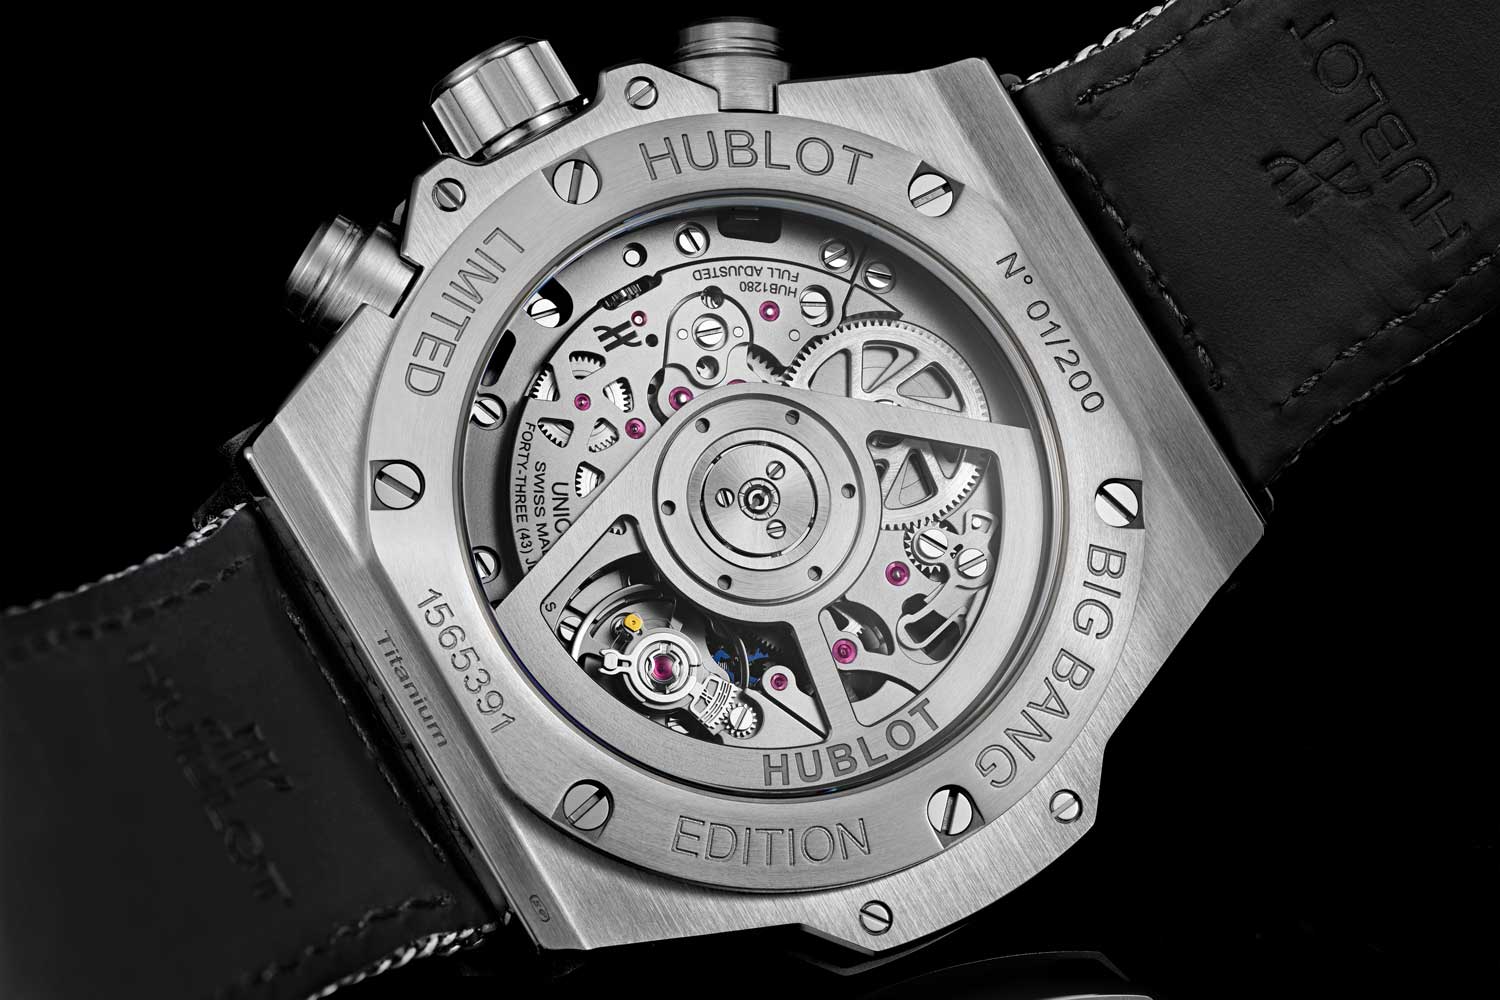 Hublot caliber HUB1280 is self-winding chronograph with flyback function